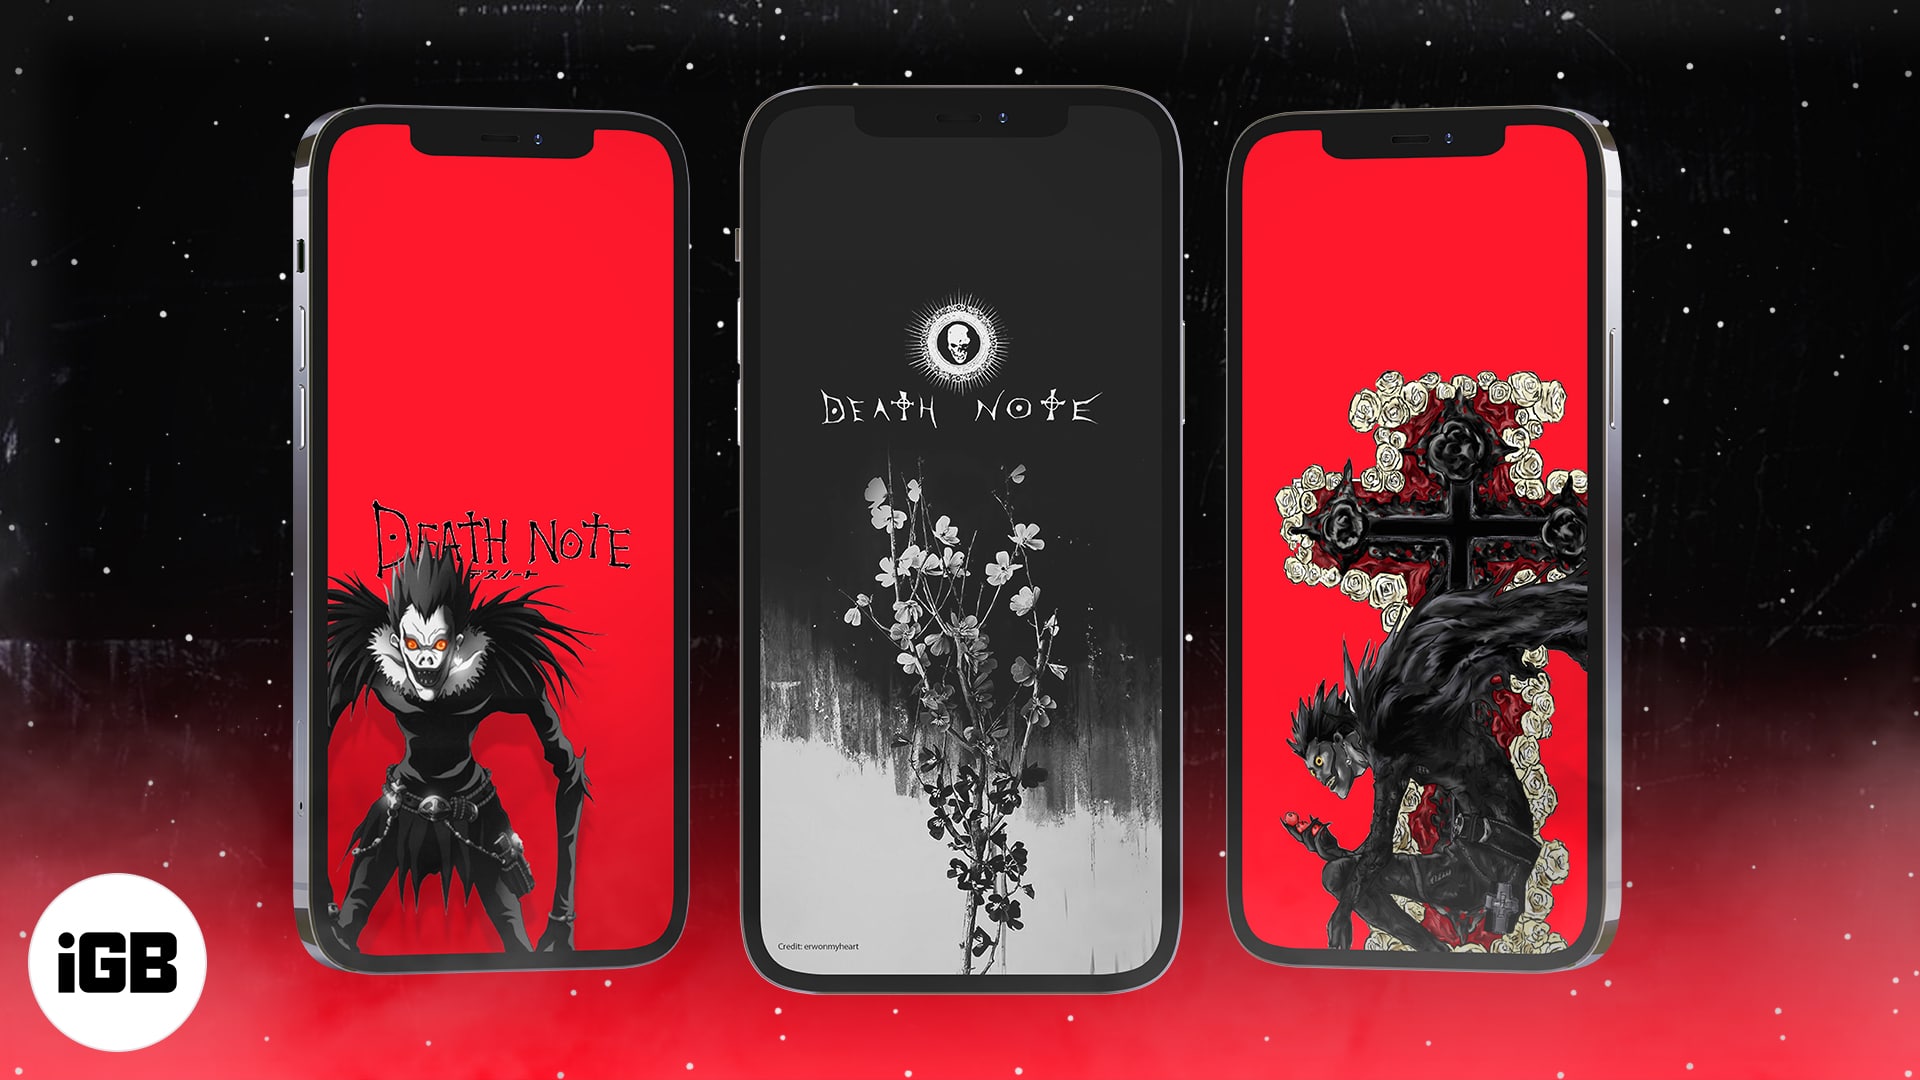 15 Death Note iPhone wallpapers in 2023 (Free HD download) - iGeeksBlog